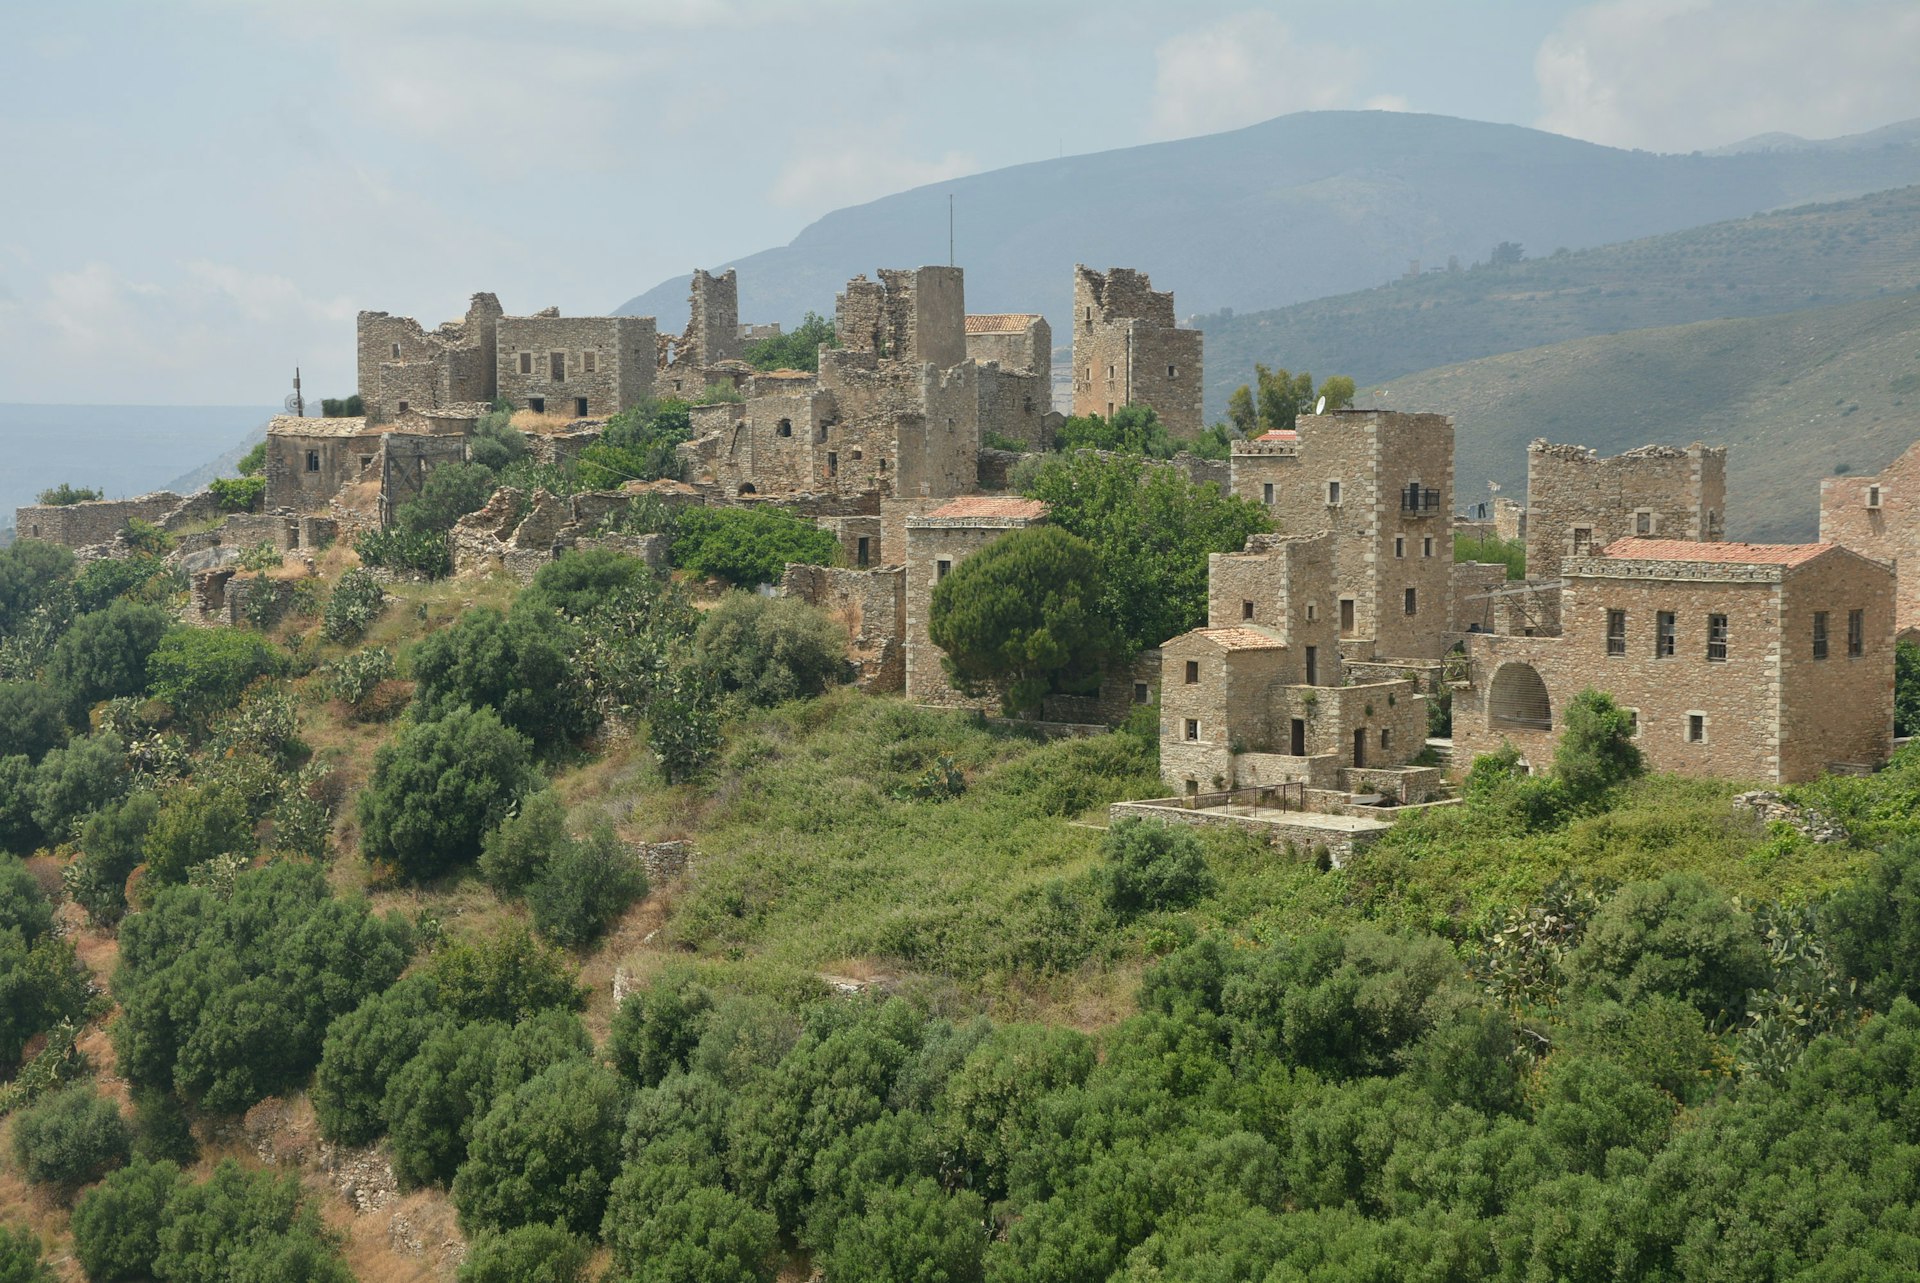 View of the stone buildings of the Vathia tower houses in the Mani region of Peloponnese. Some of the buildings are crumbling on the green mountainside. 